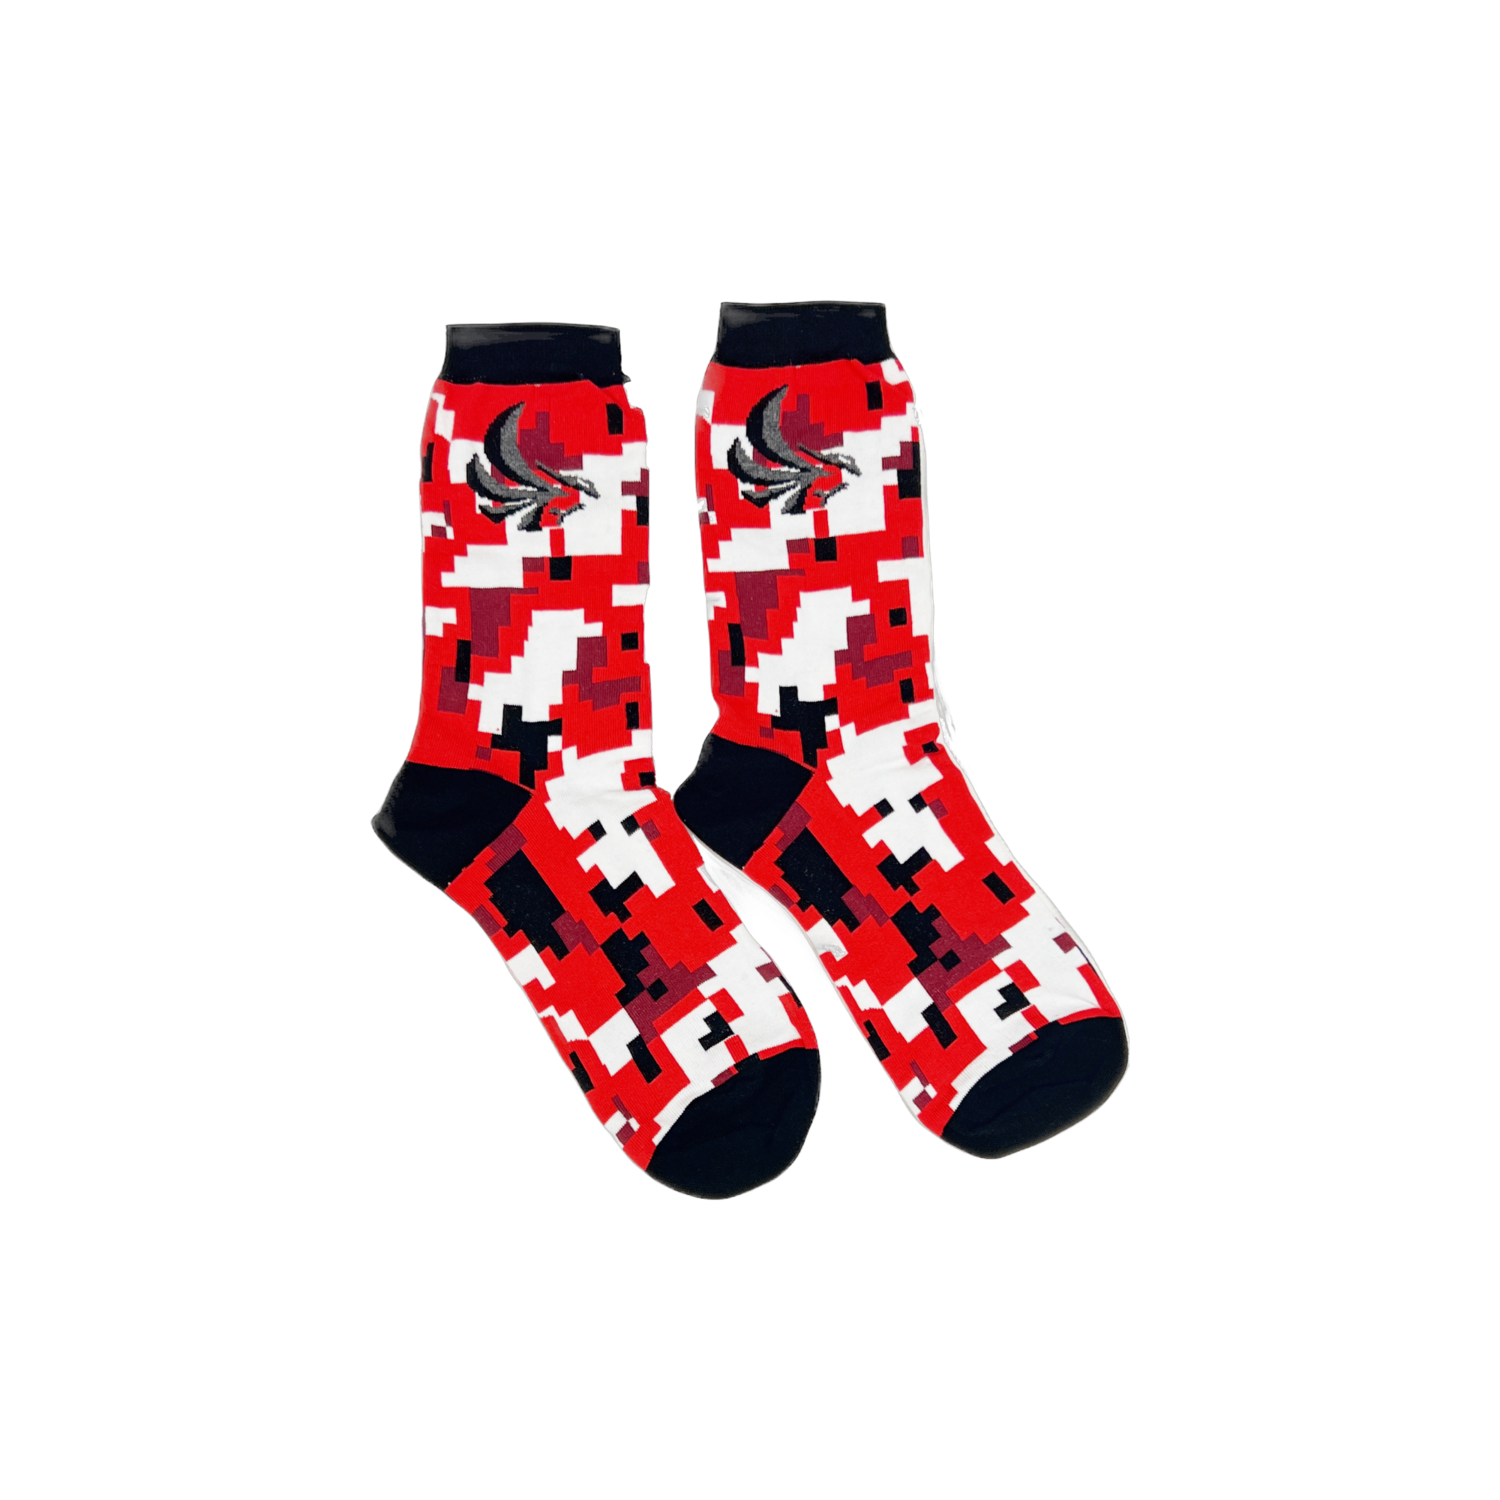 RED CAMO PRINT SOCKS, SIZE: YOUTH